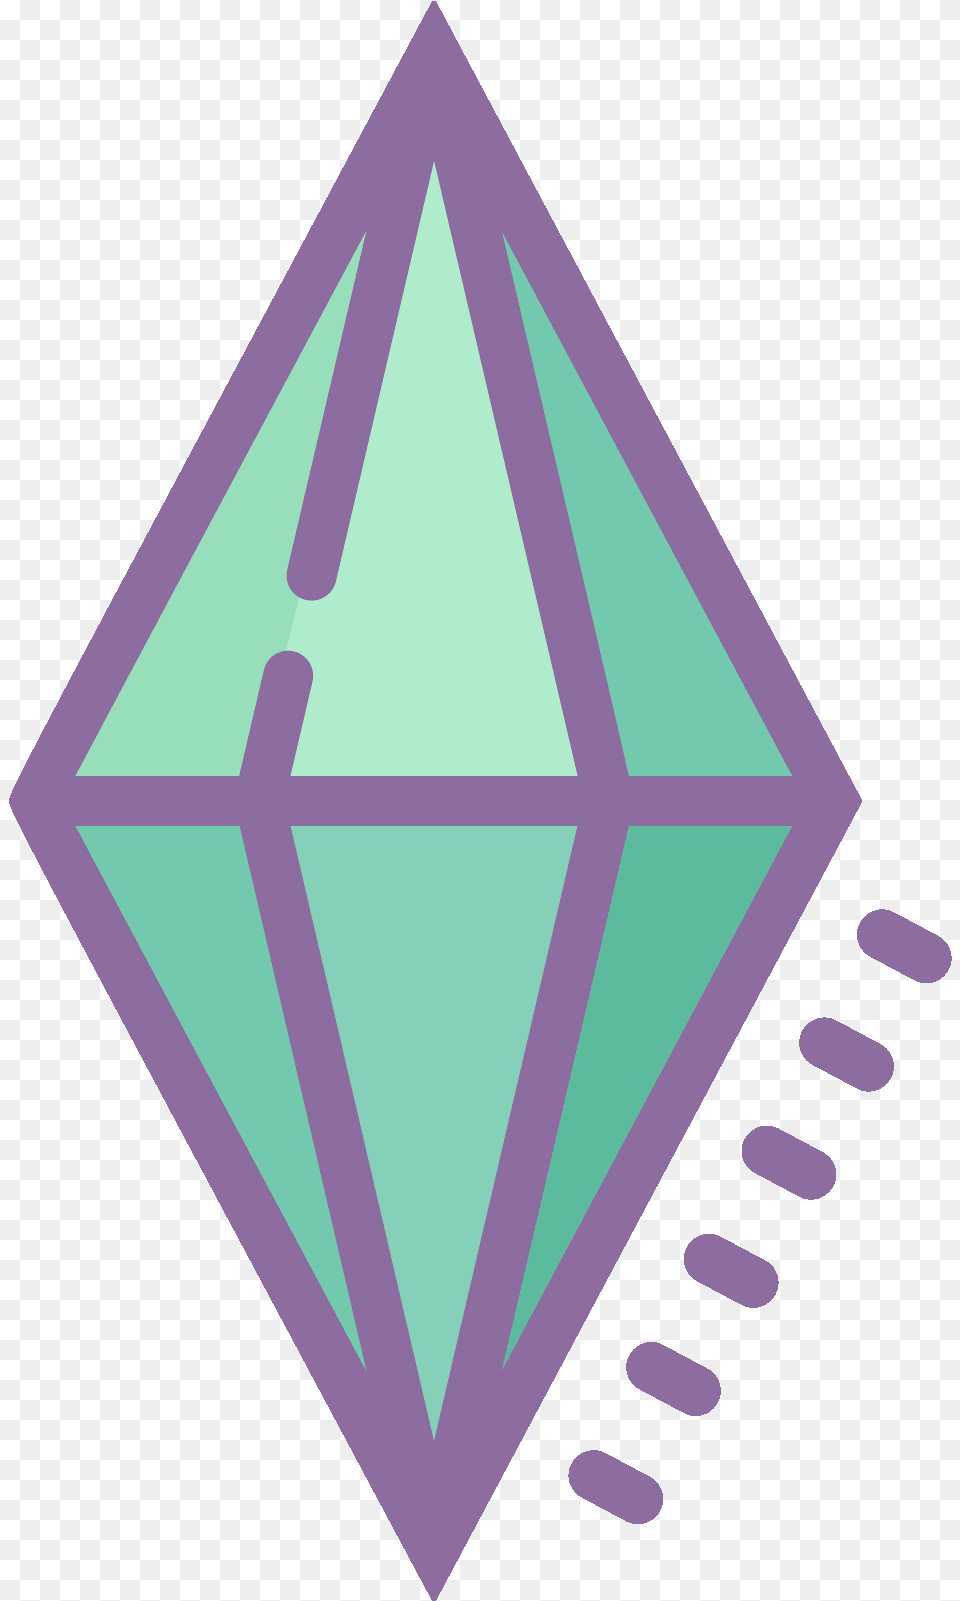 The Sims Icon Triangle Free Png